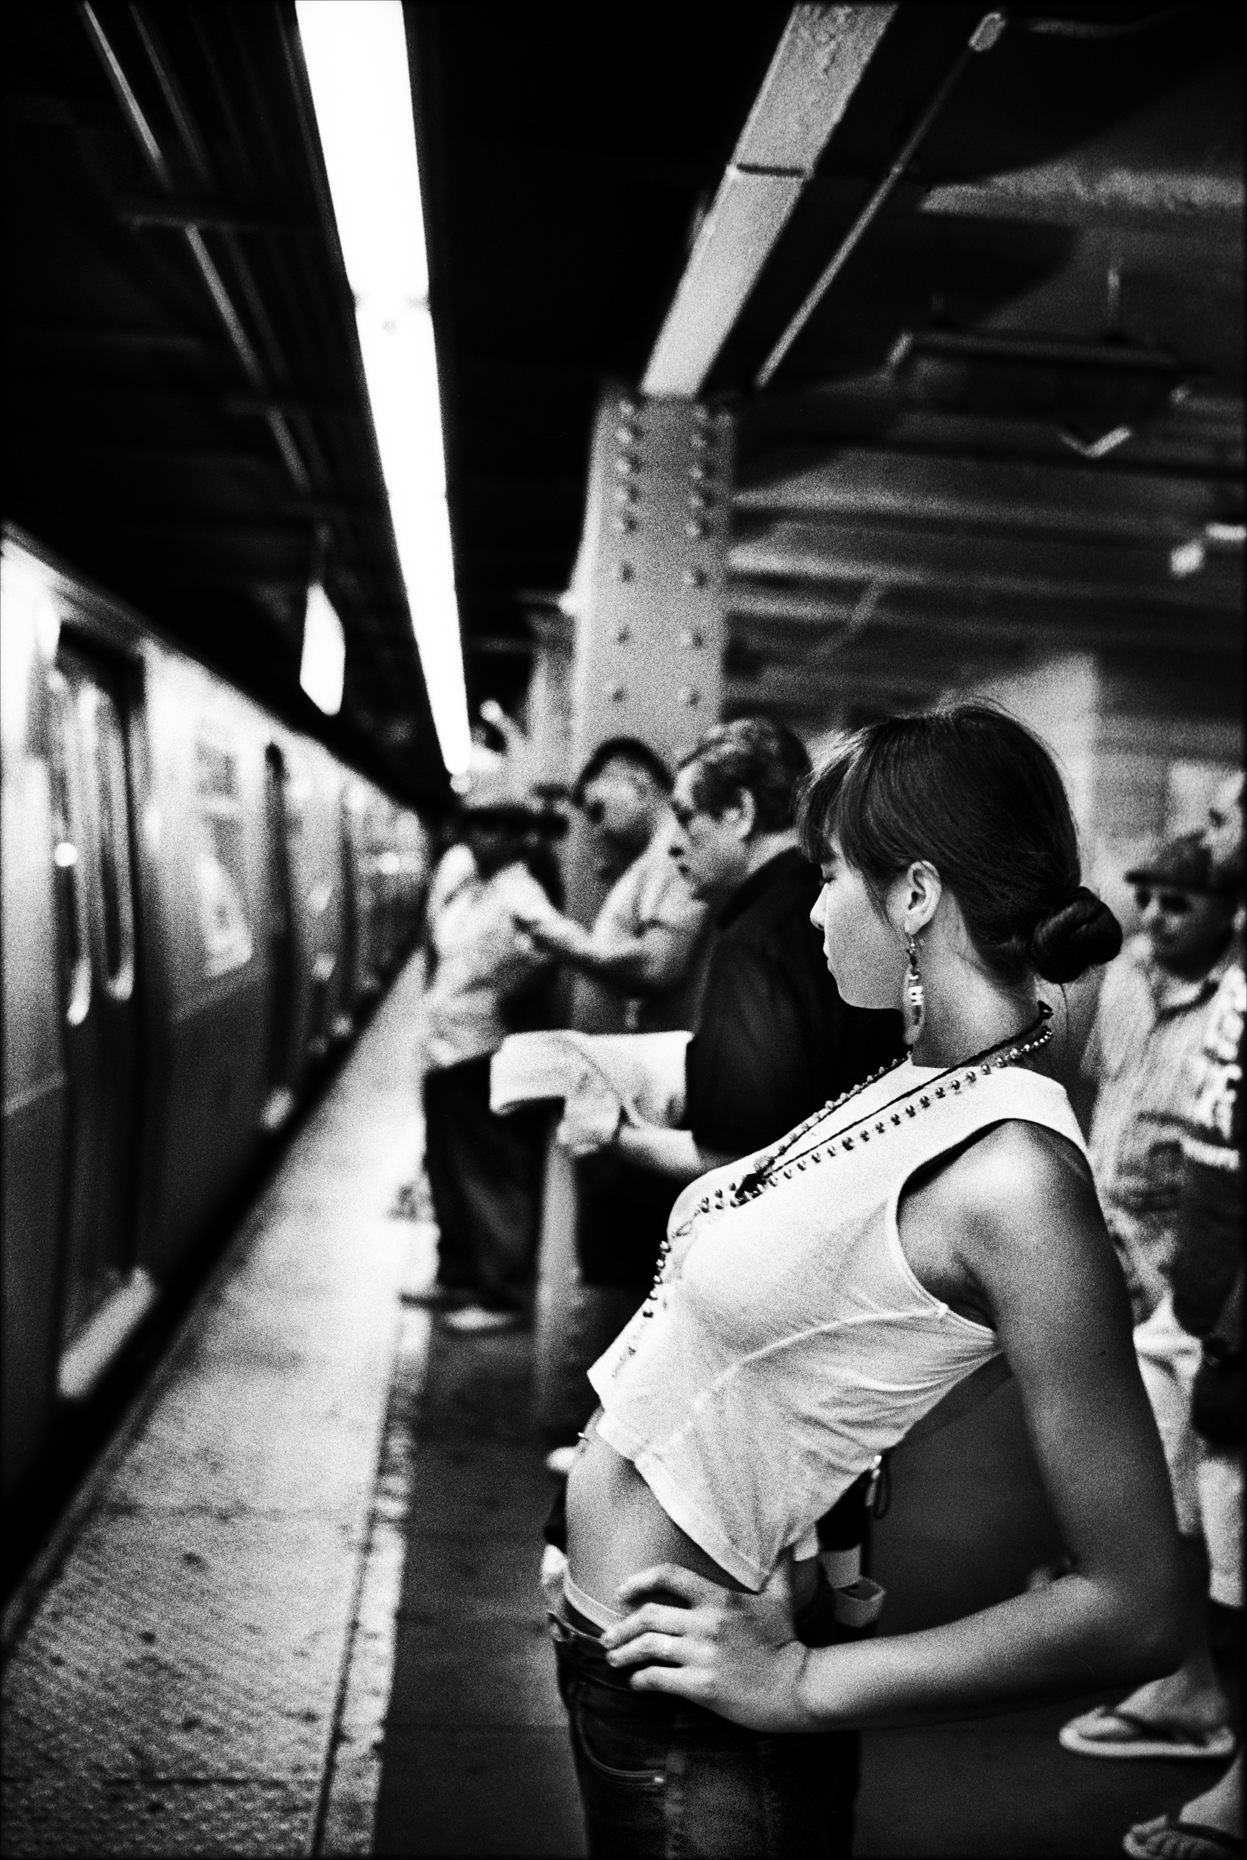 L-Train Stop at 6th Avenue, New York City, 2010 (from Dear New Yorker)